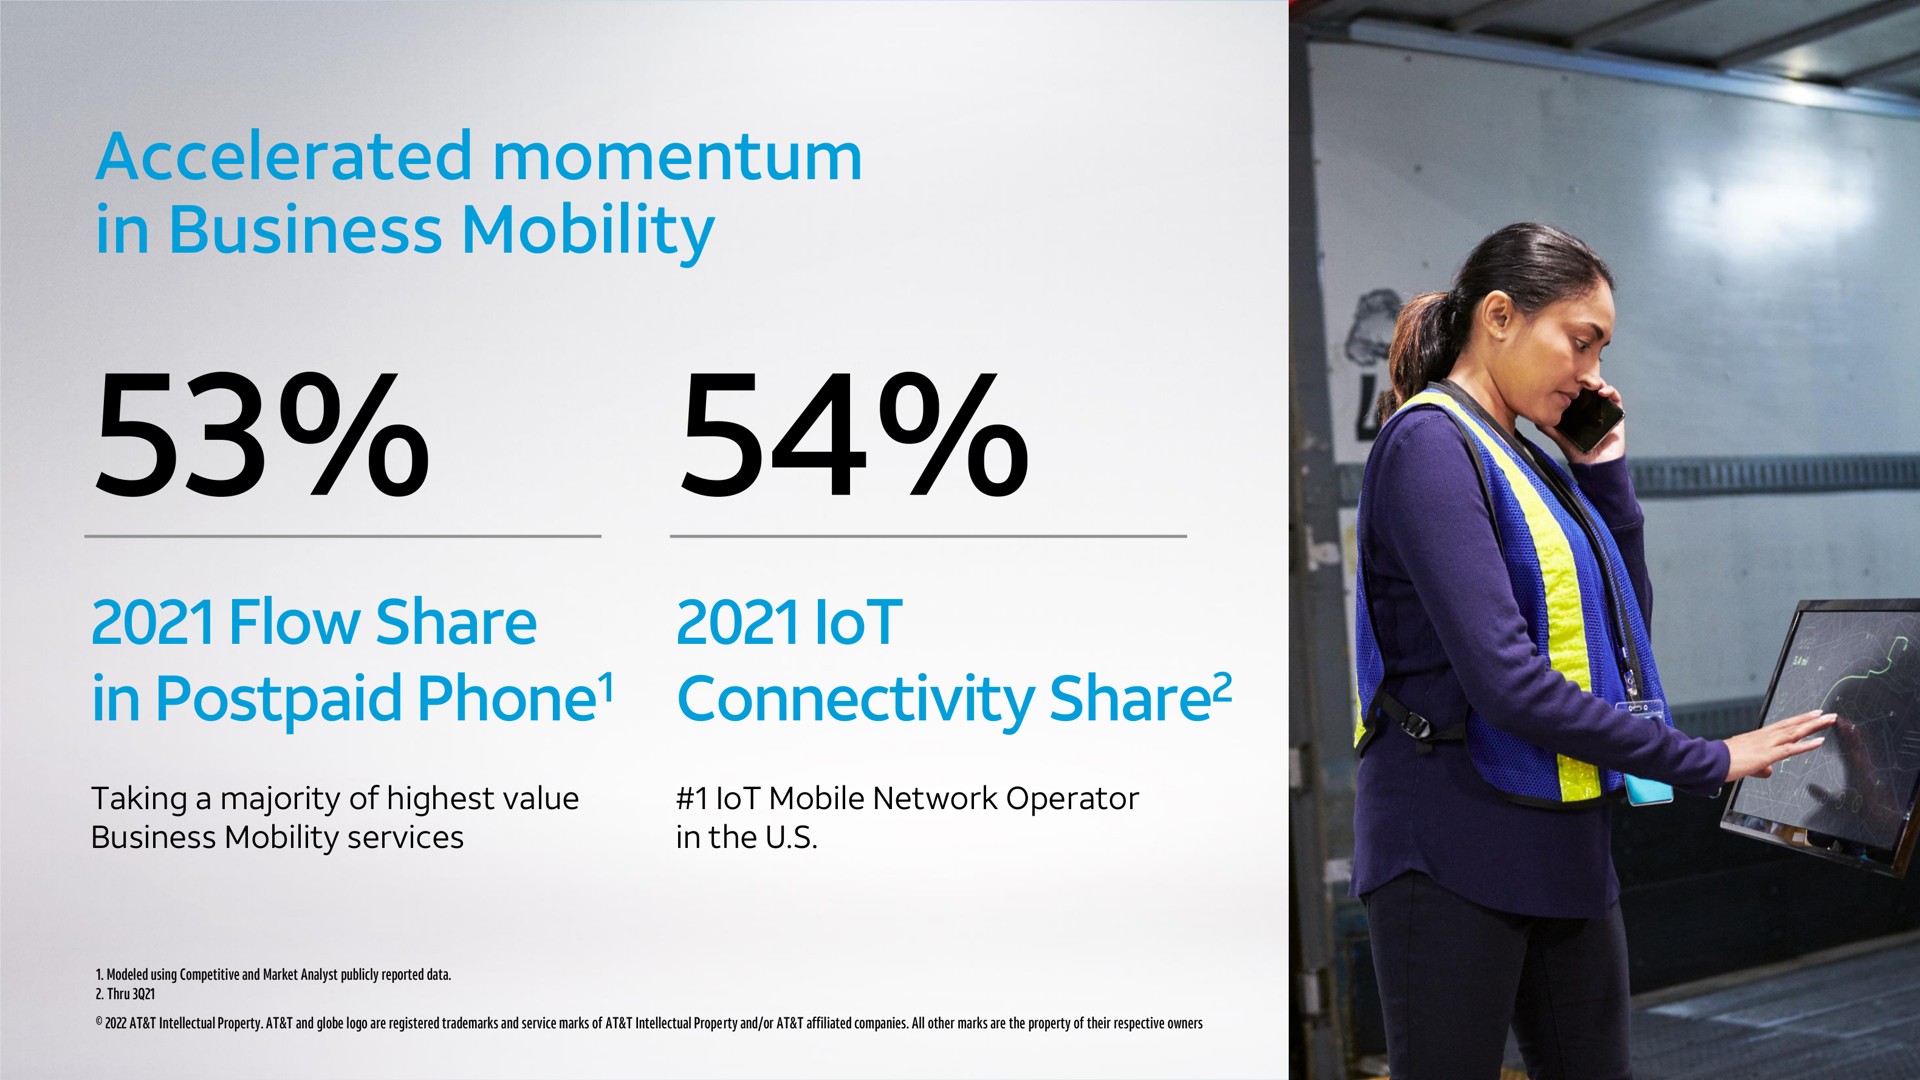 accelerated momentum in business mobility flow share postpaid phone lot connectivity share | AT&T